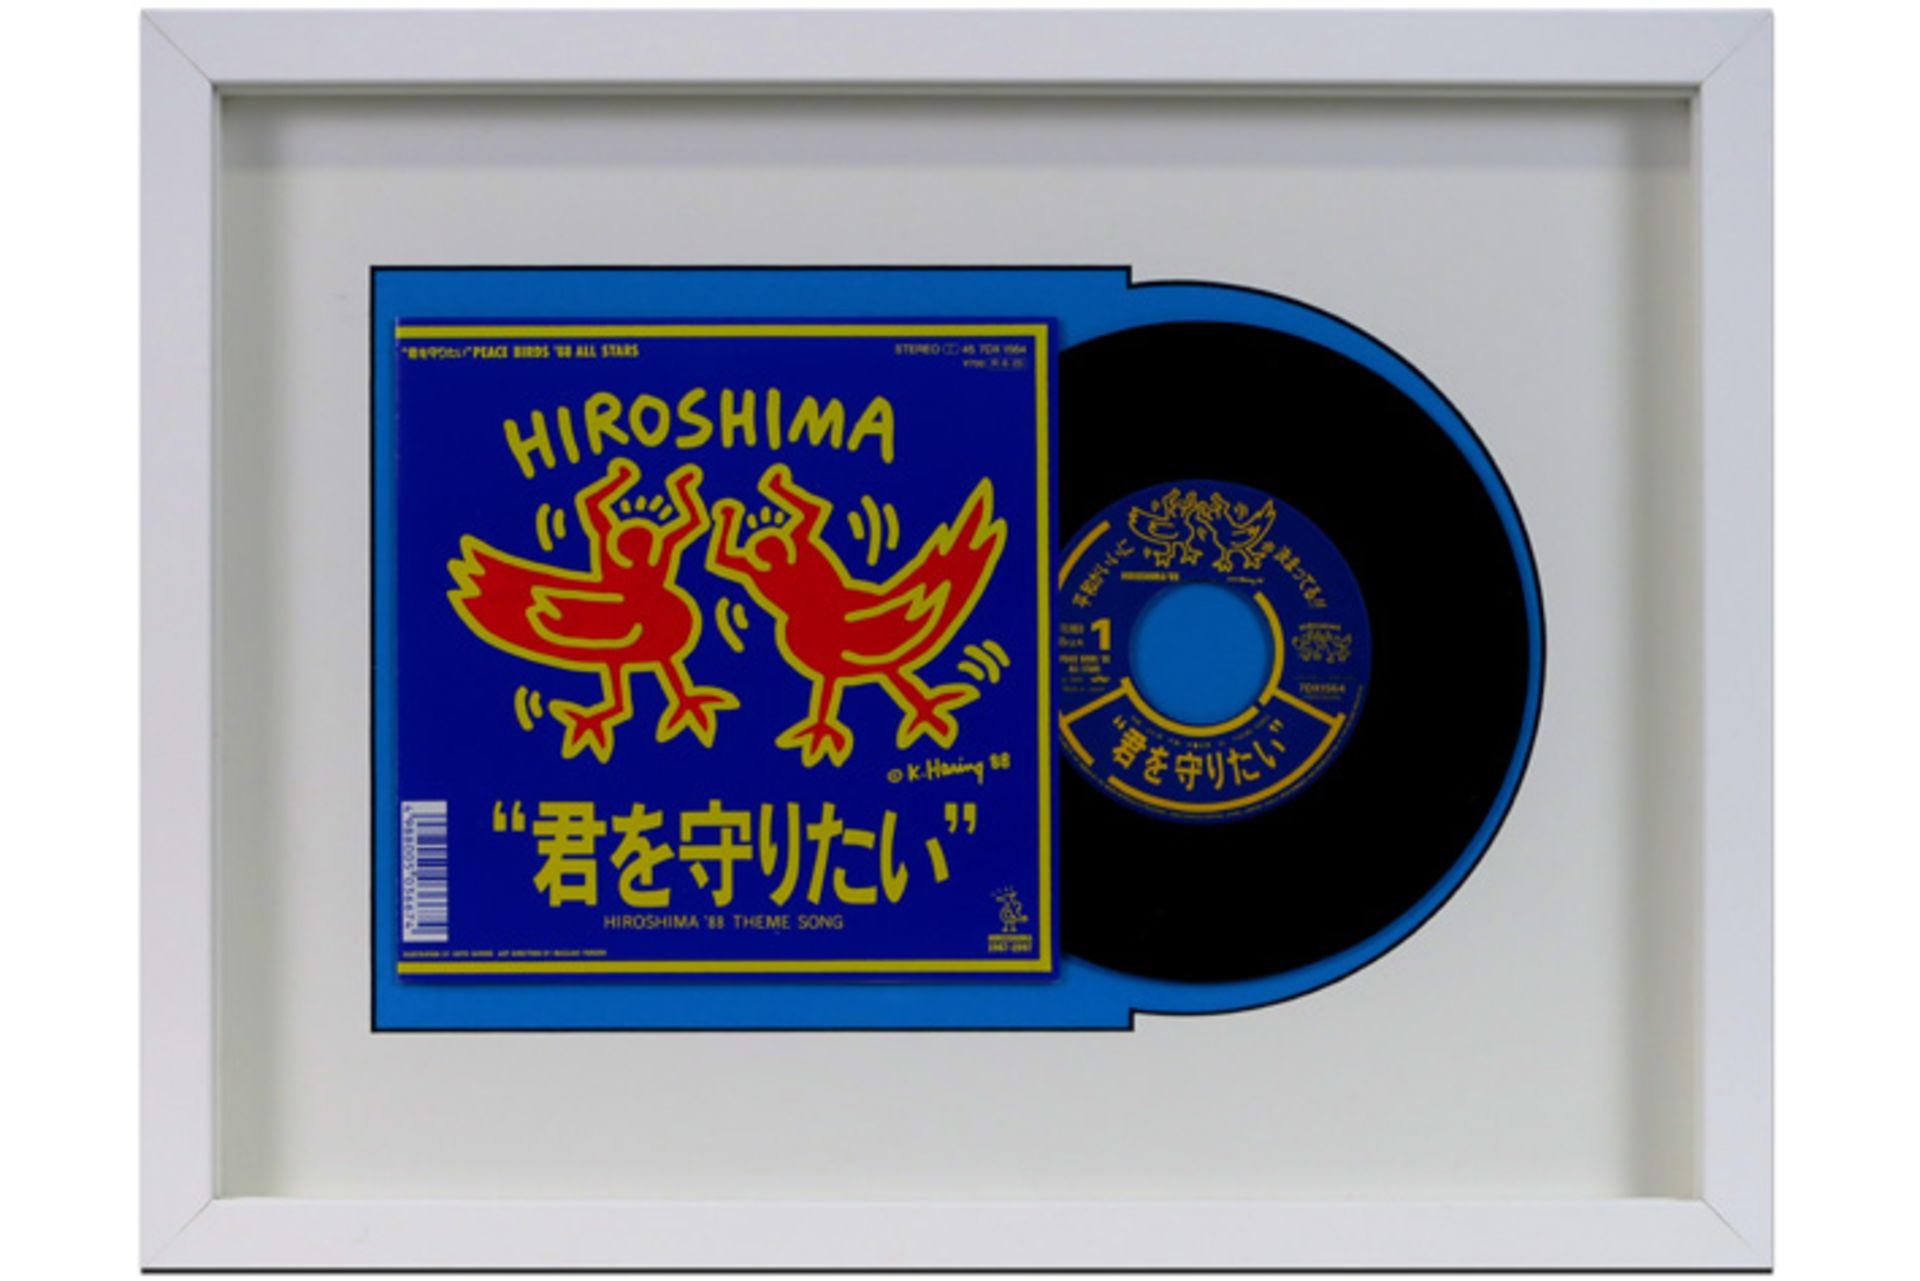 Japanese edition of the record cover designed by Keith Haring for and with the record "Peace